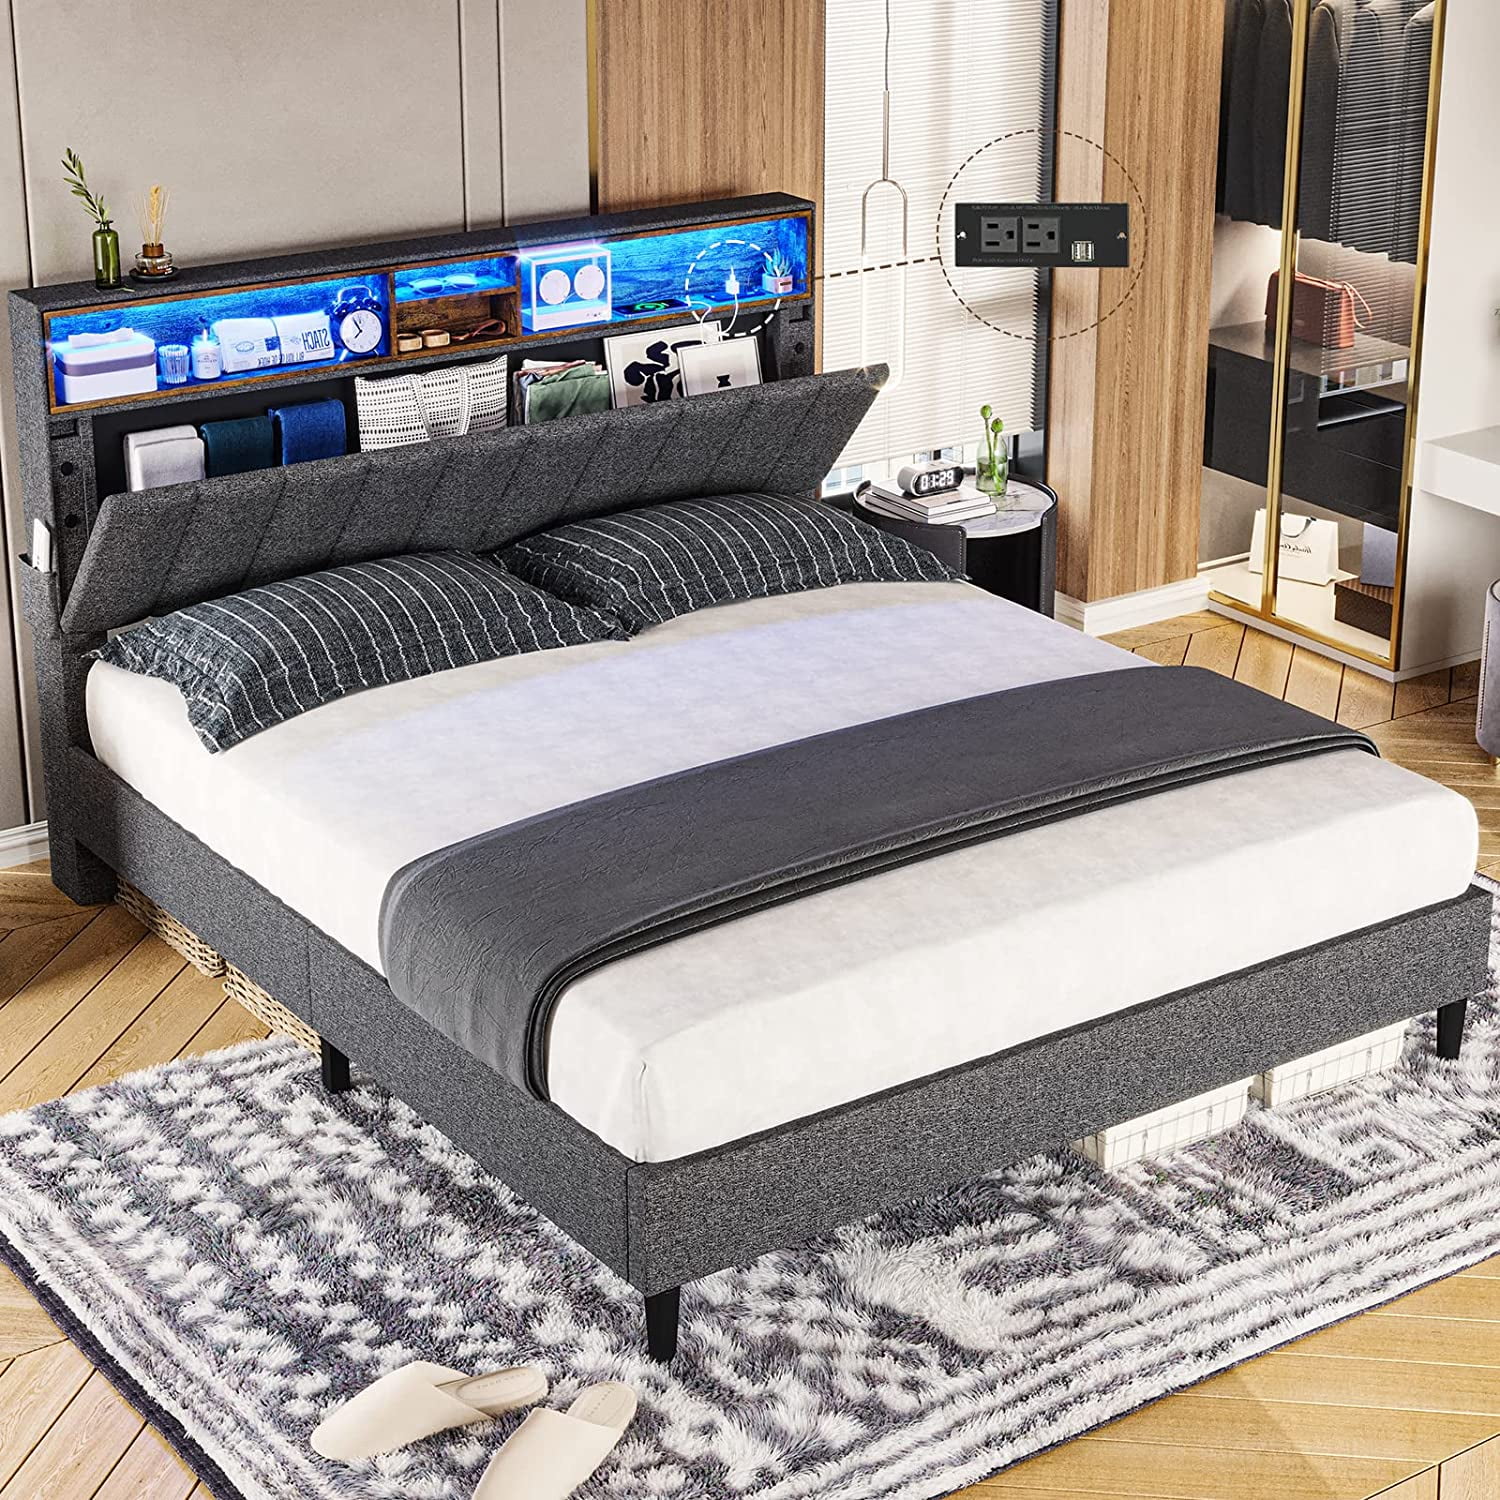 ADORNEVE Full Size LED Bed with Outlet and USB Ports, Platform Bed Frame with Storage Headboard, No Box Spring Needed, Dark Grey - Walmart.com